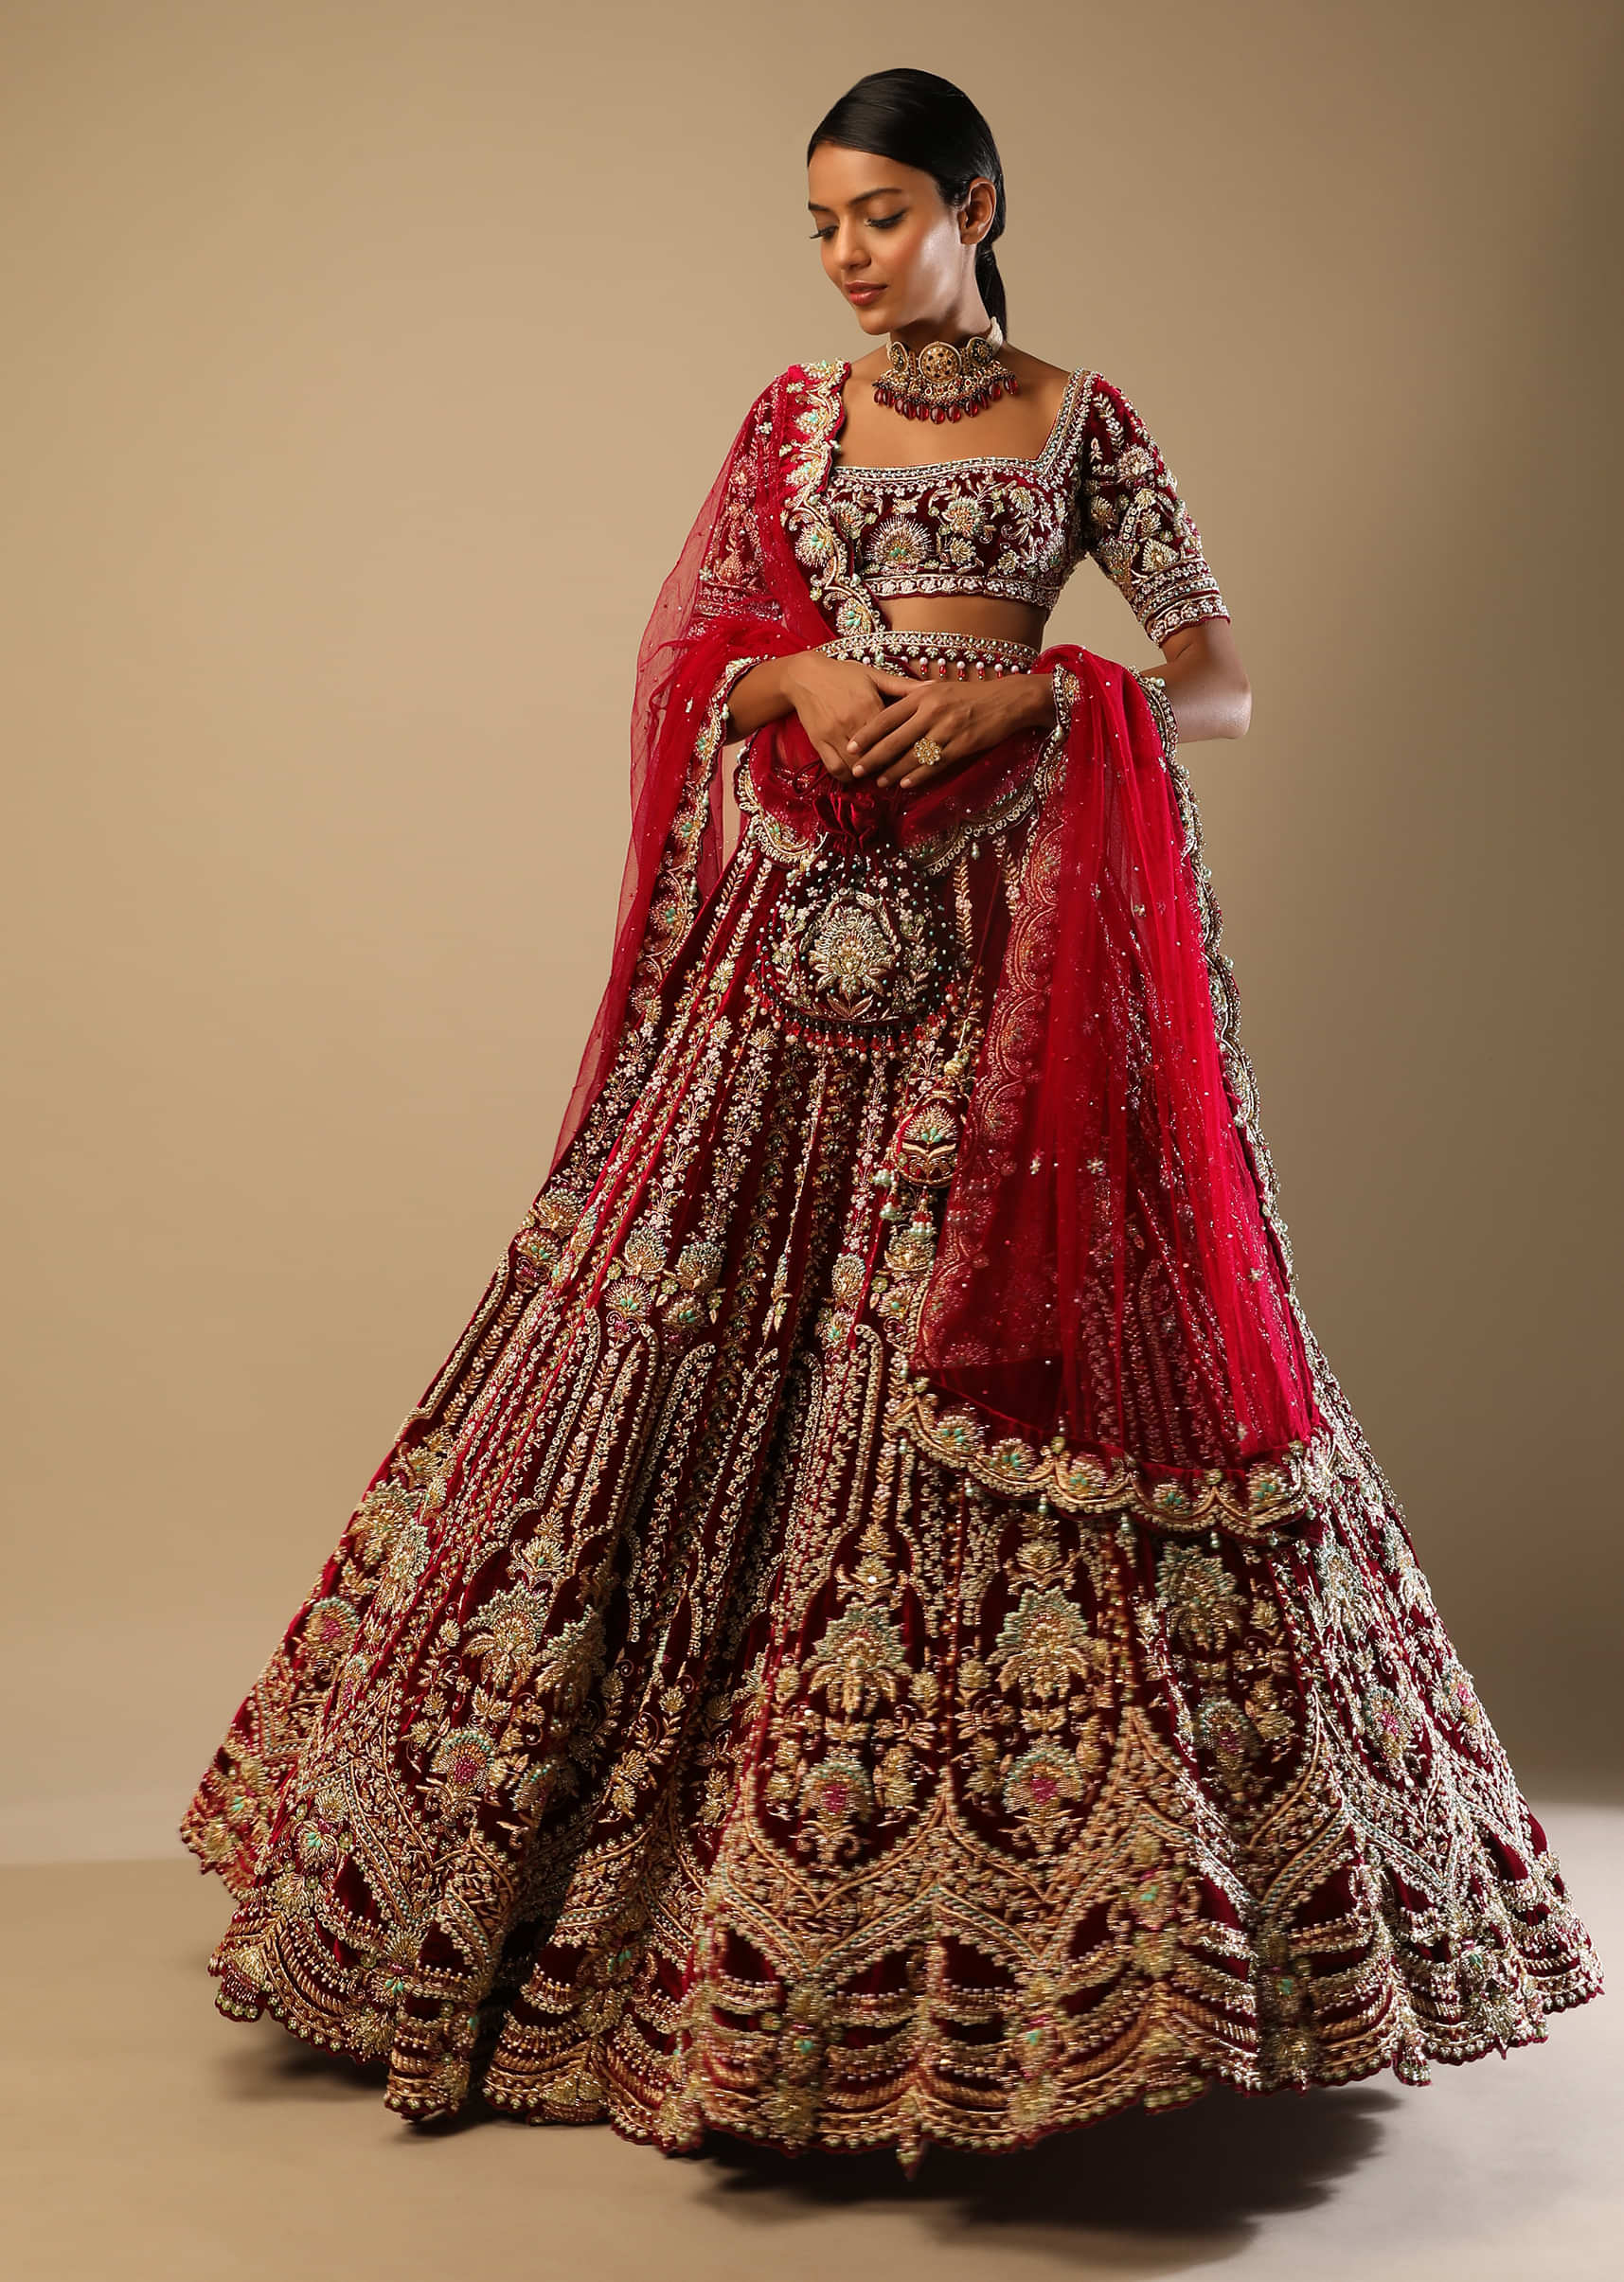 Persian Red Lehenga Choli In Velvet With Multi Colored Hand Embroidered Mughal Kalis And Floral Motifs 